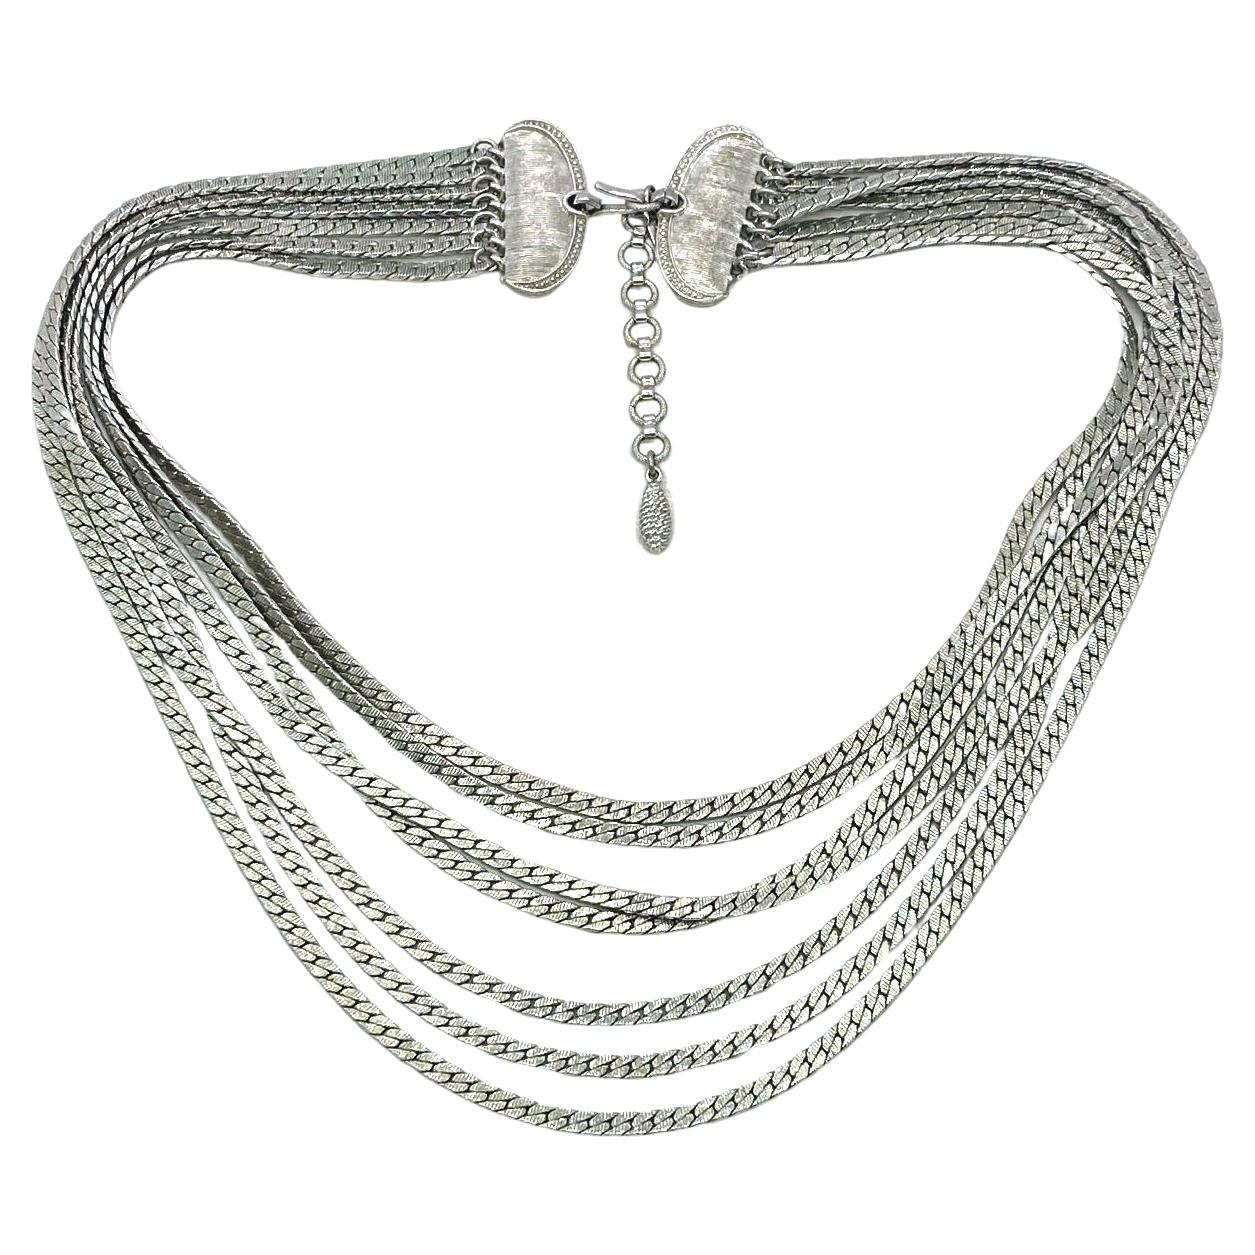 This is a Monet multi-strand chain necklace. This vintage necklace comes with seven strands of 0.125